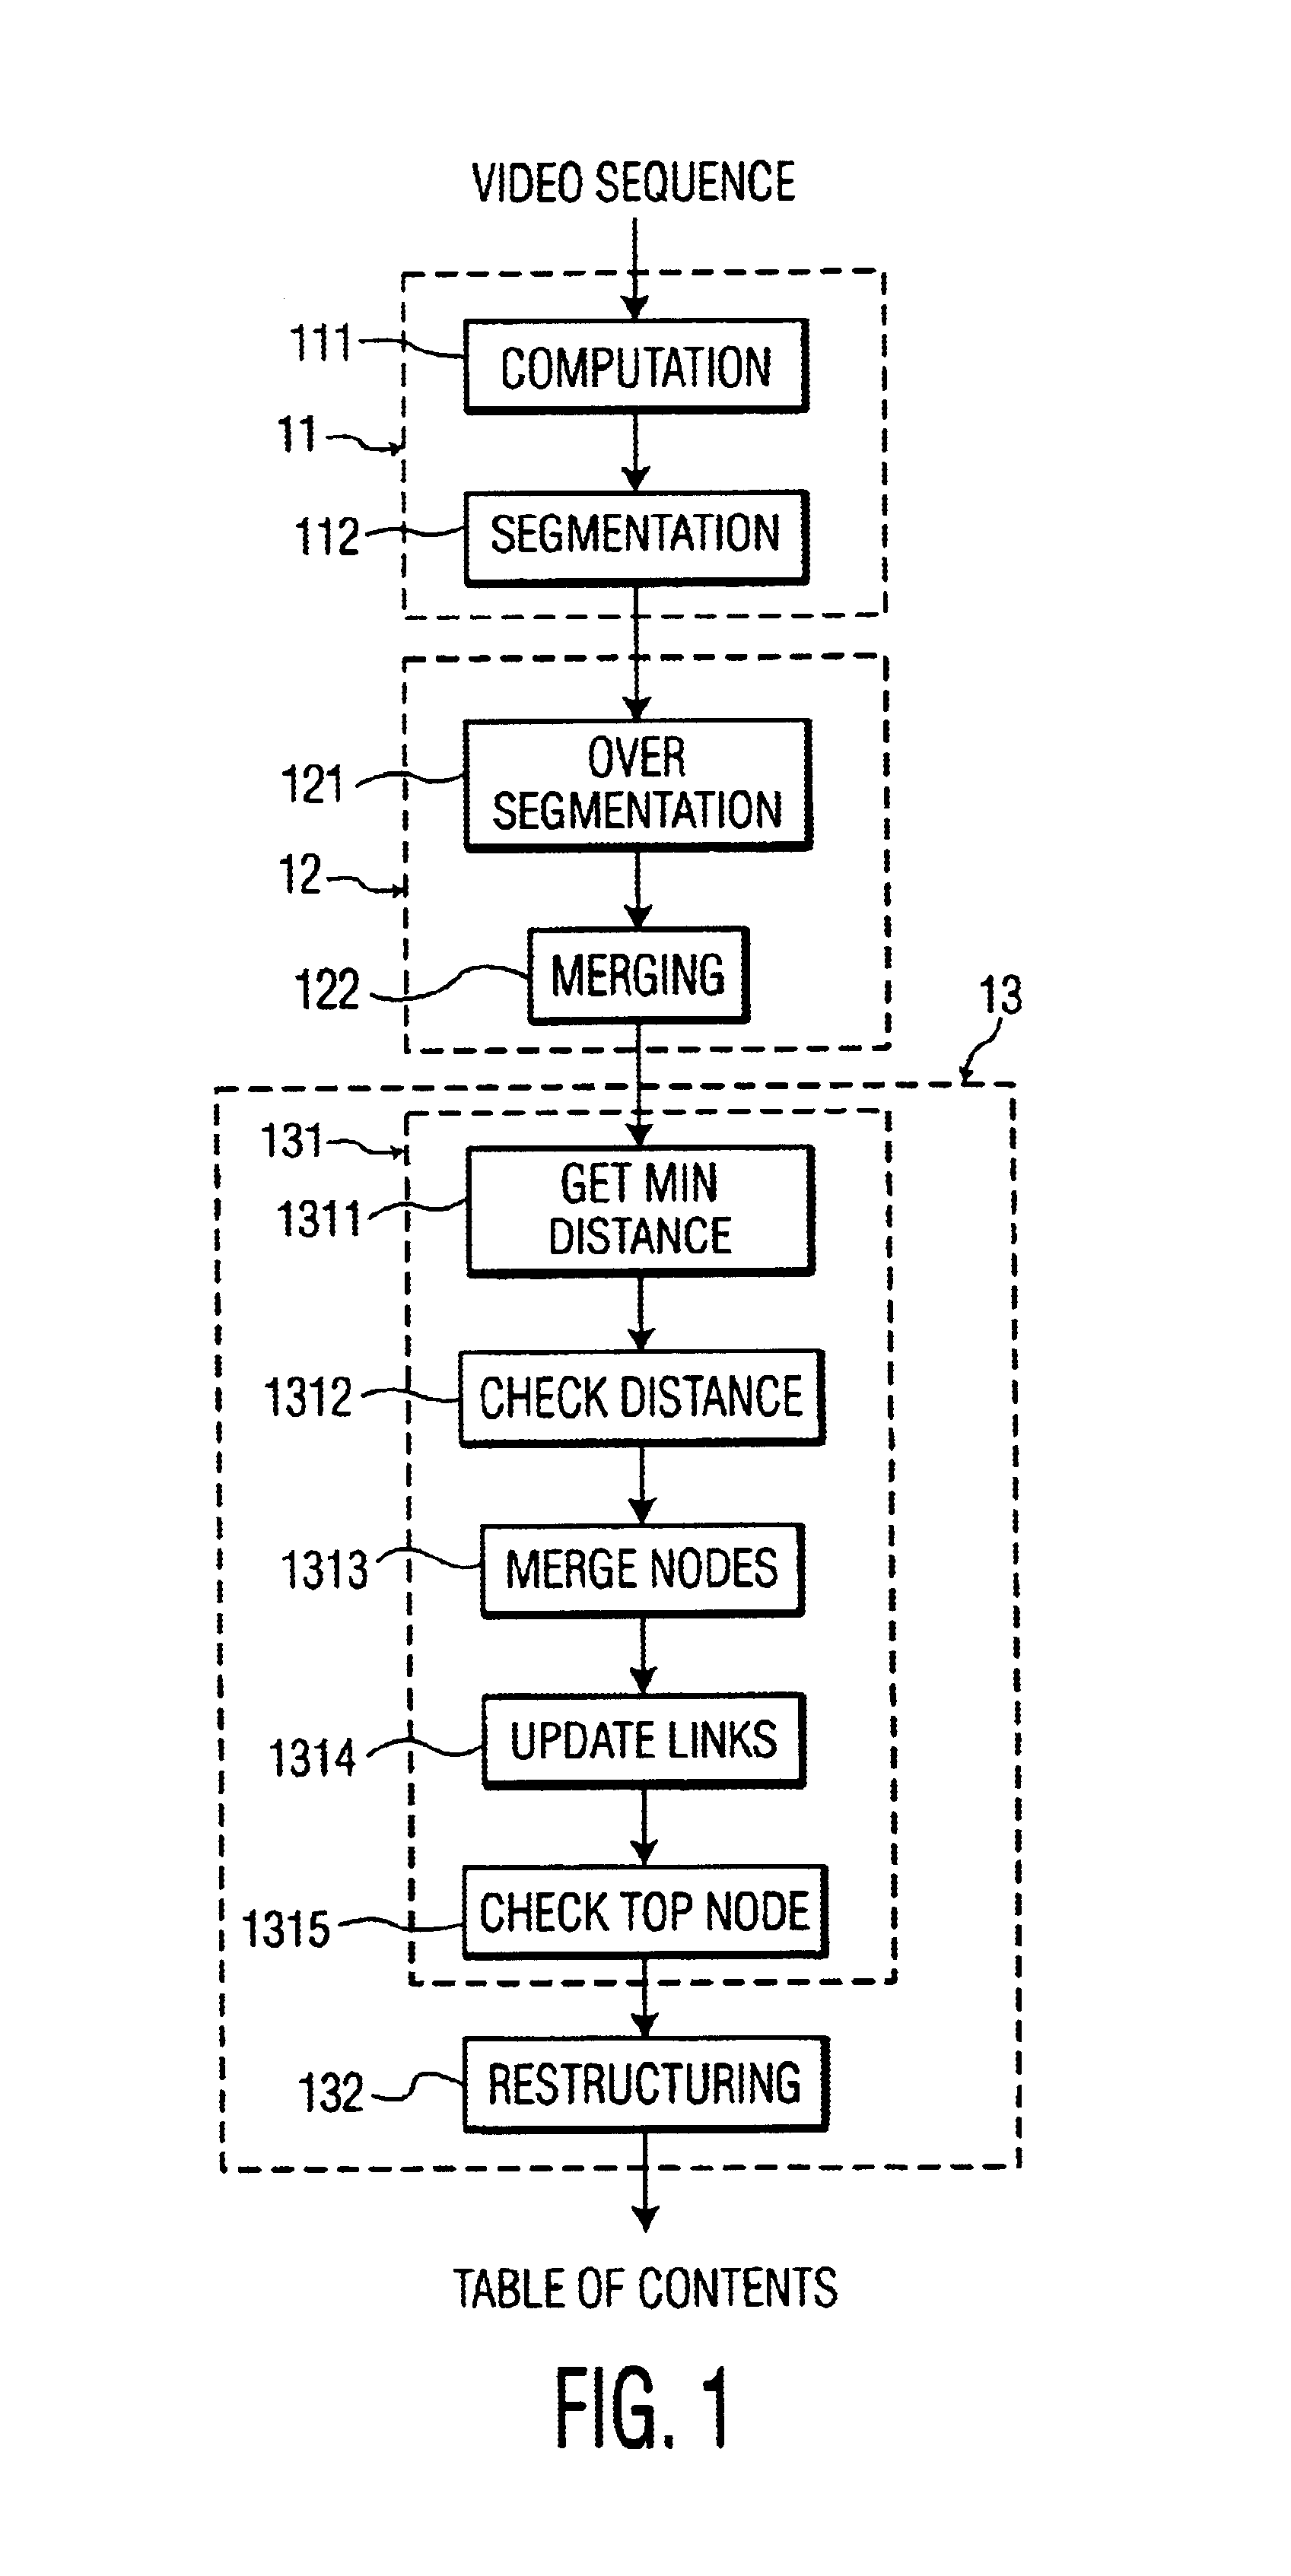 Automatic extraction method of the structure of a video sequence